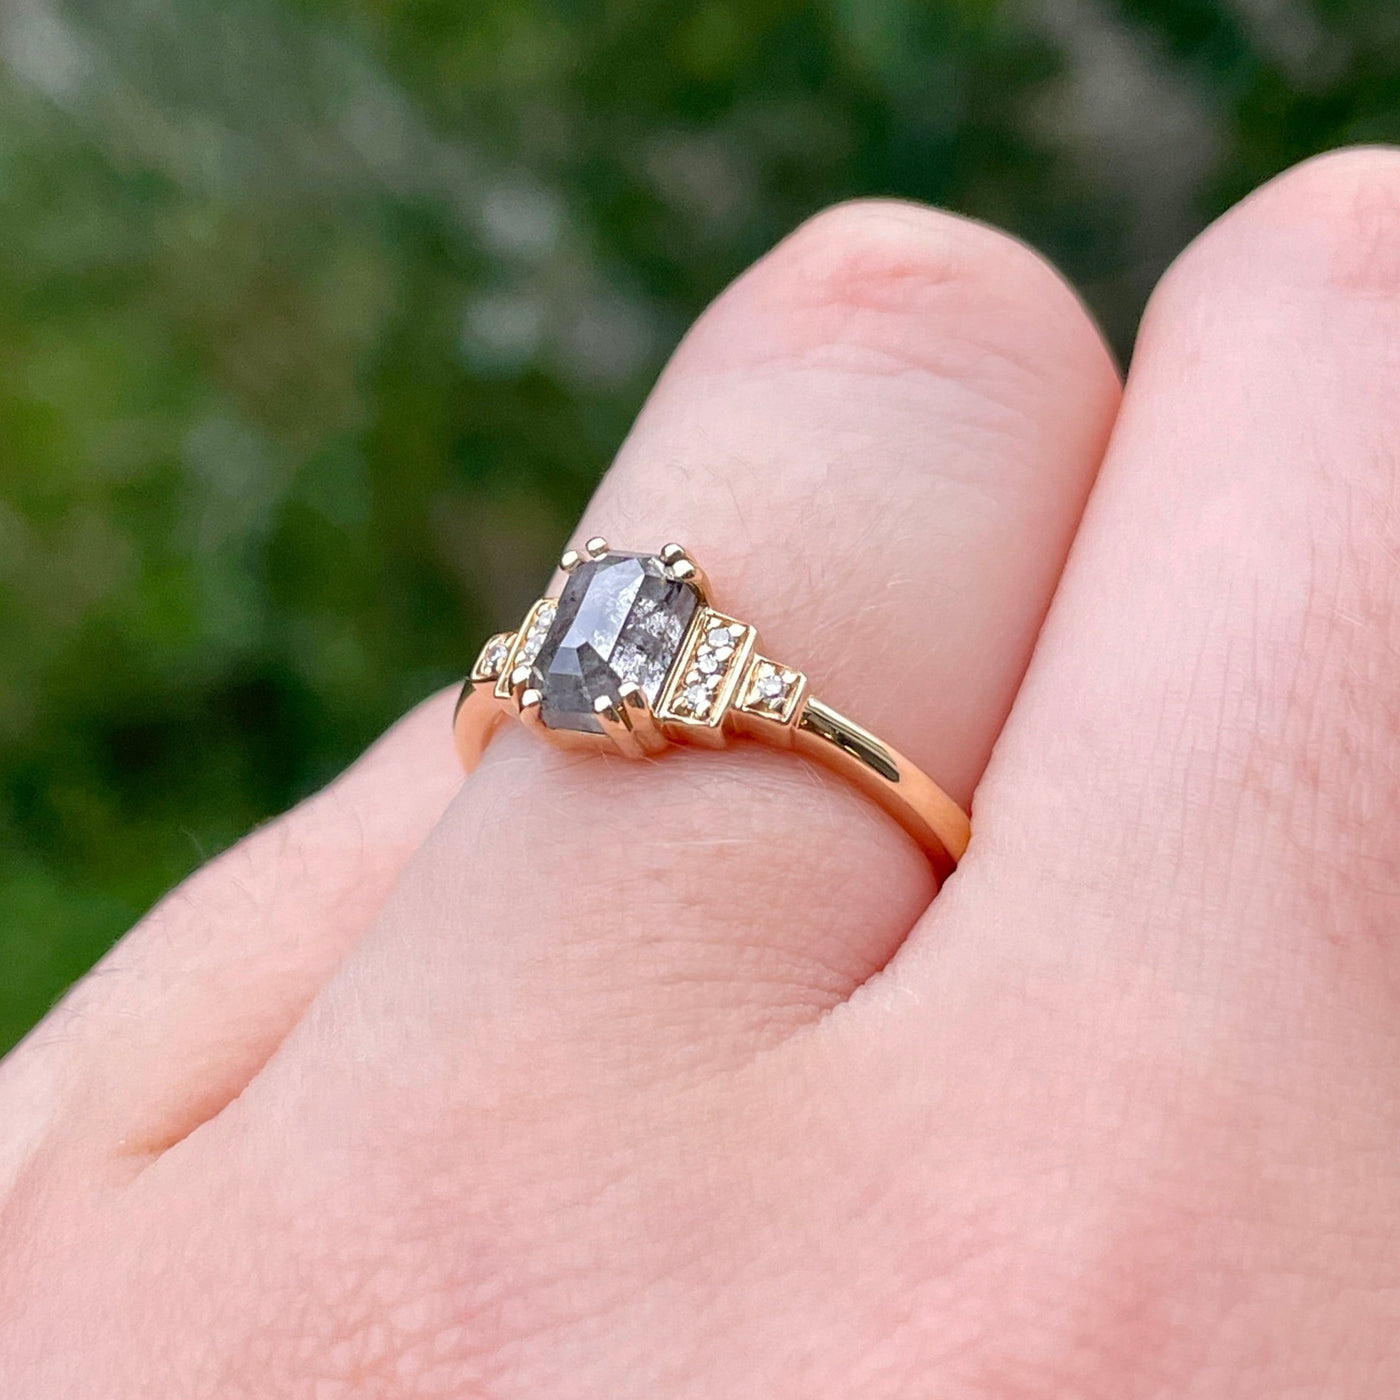 Grace - Emerald Cut Salt and Pepper Diamond Engagement Ring with Diamond Bars in Yellow Gold - Ready-to-Wear